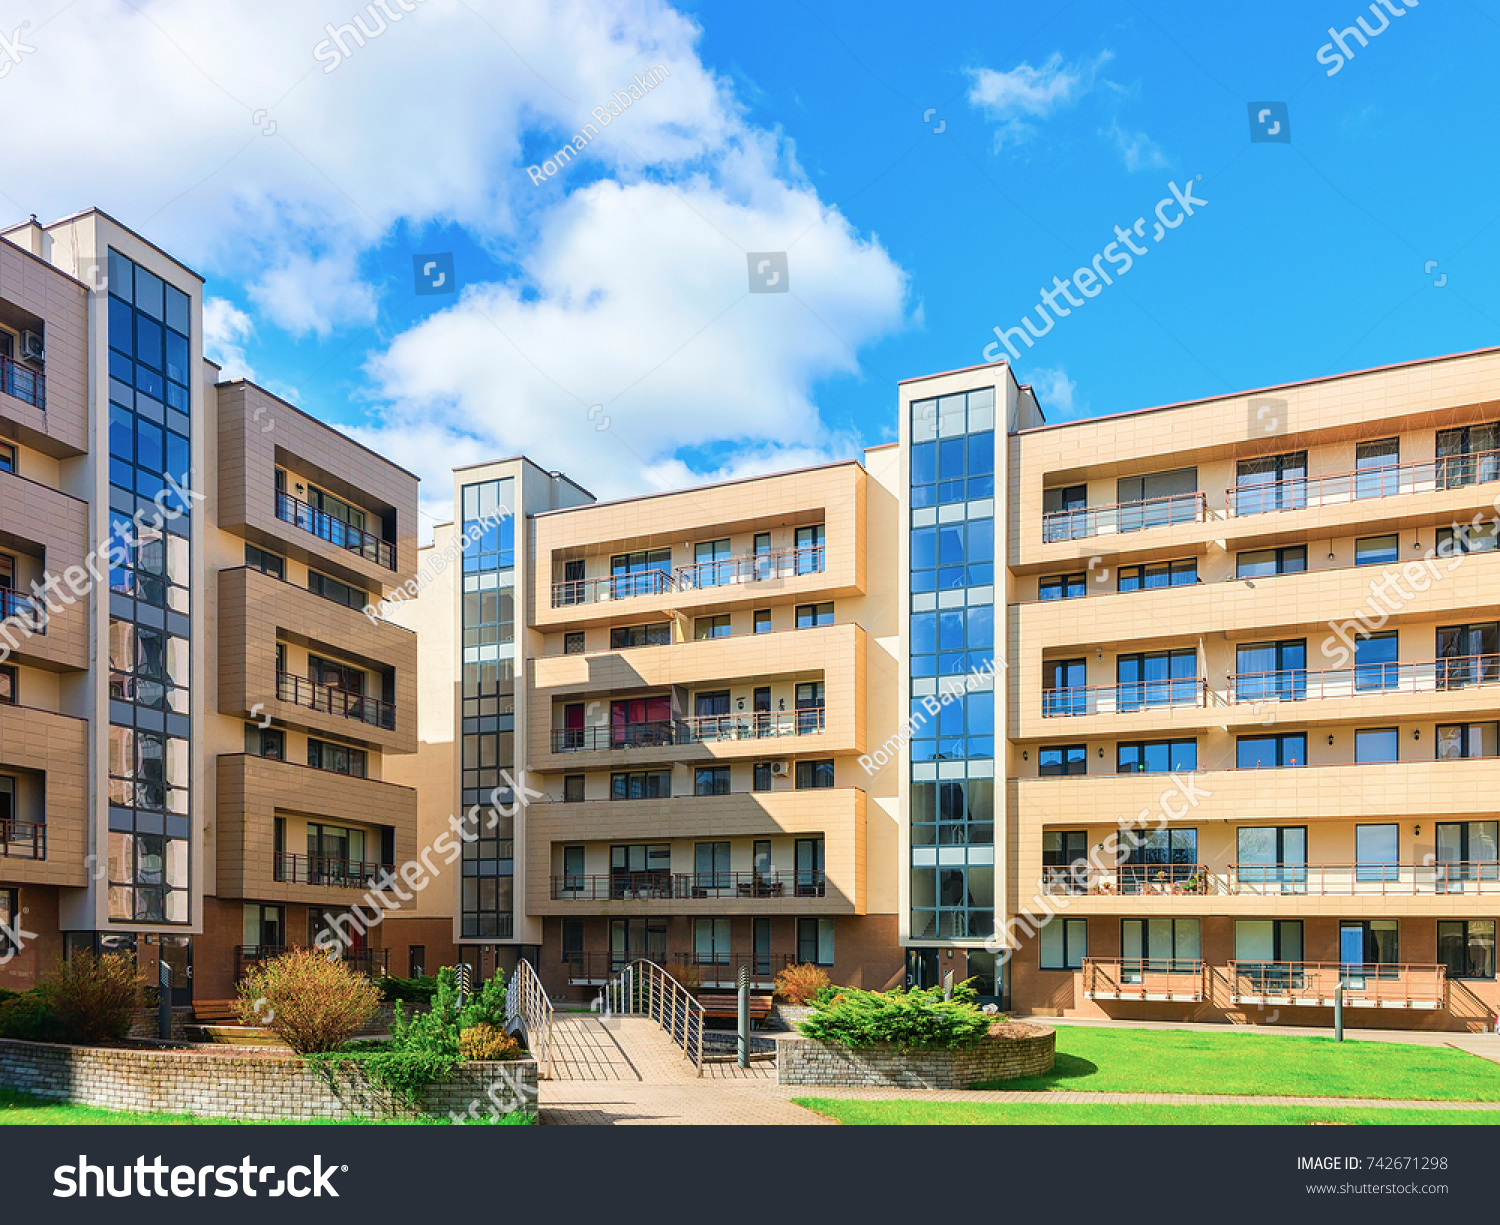 Druskininkai, Lithuania - May 1, 2017: Contemporary european complex of residential buildings #742671298